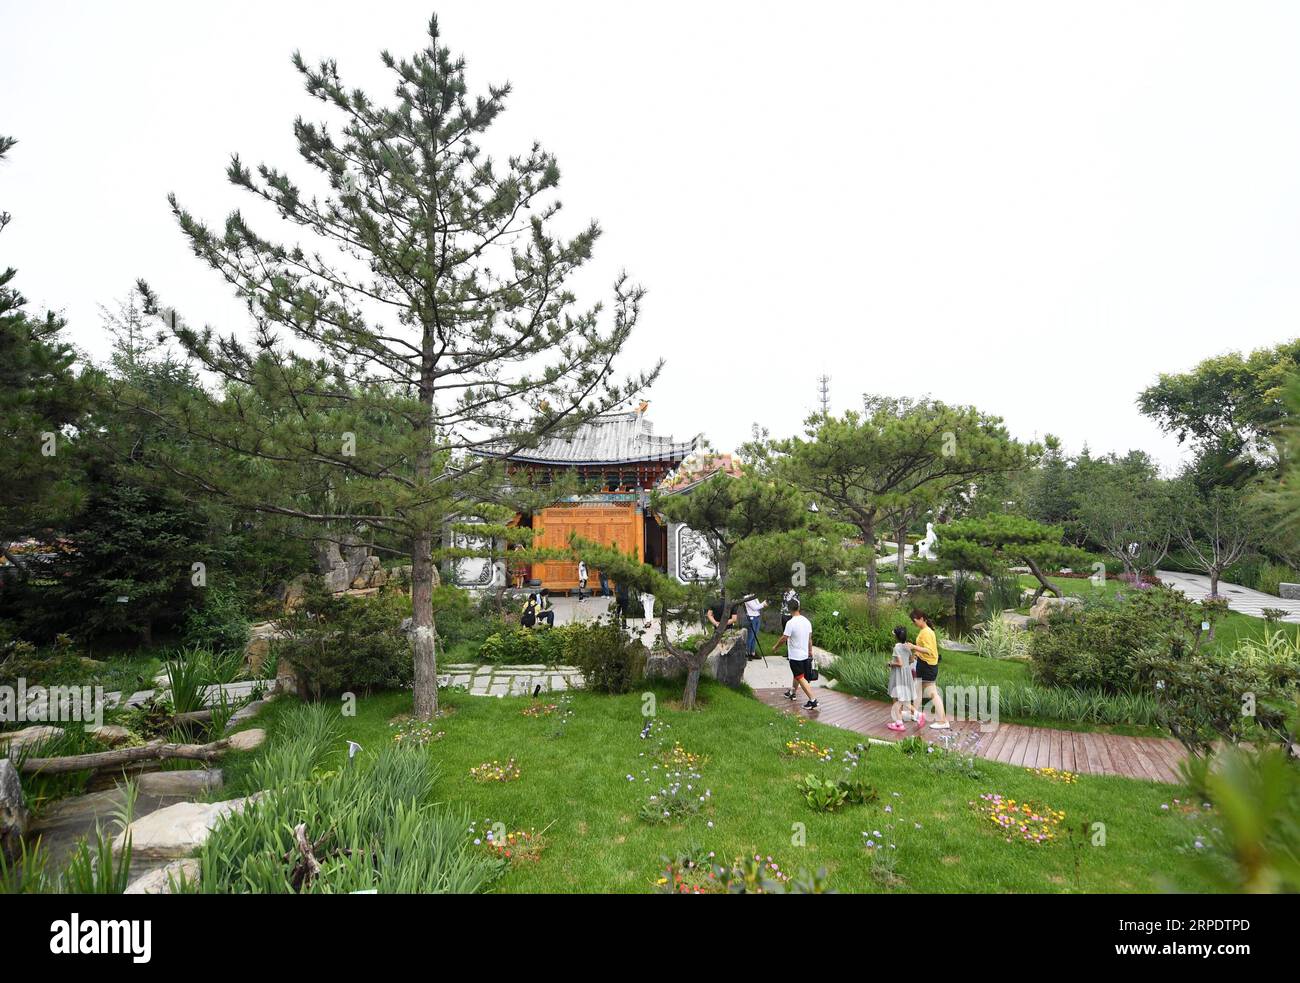 (190812) -- BEIJING, Aug. 12, 2019 -- Tourists visit the Yunnan Garden at the Beijing International Horticultural Exhibition in Beijing, capital of China, Aug. 11, 2019. Yunnan Province, located in southwestern China, is very rich in biodiversity thanks to its advantageous natural conditions of abundant plateau mountains and distinct climates. The forest coverage in Yunnan has reached 60.3 percent, and the province is known as Animal Kingdom and Plant Kingdom . Yunnan set forth the aim of building it into the most beautiful province in China. It has put great efforts in promoting ecological ci Stock Photo